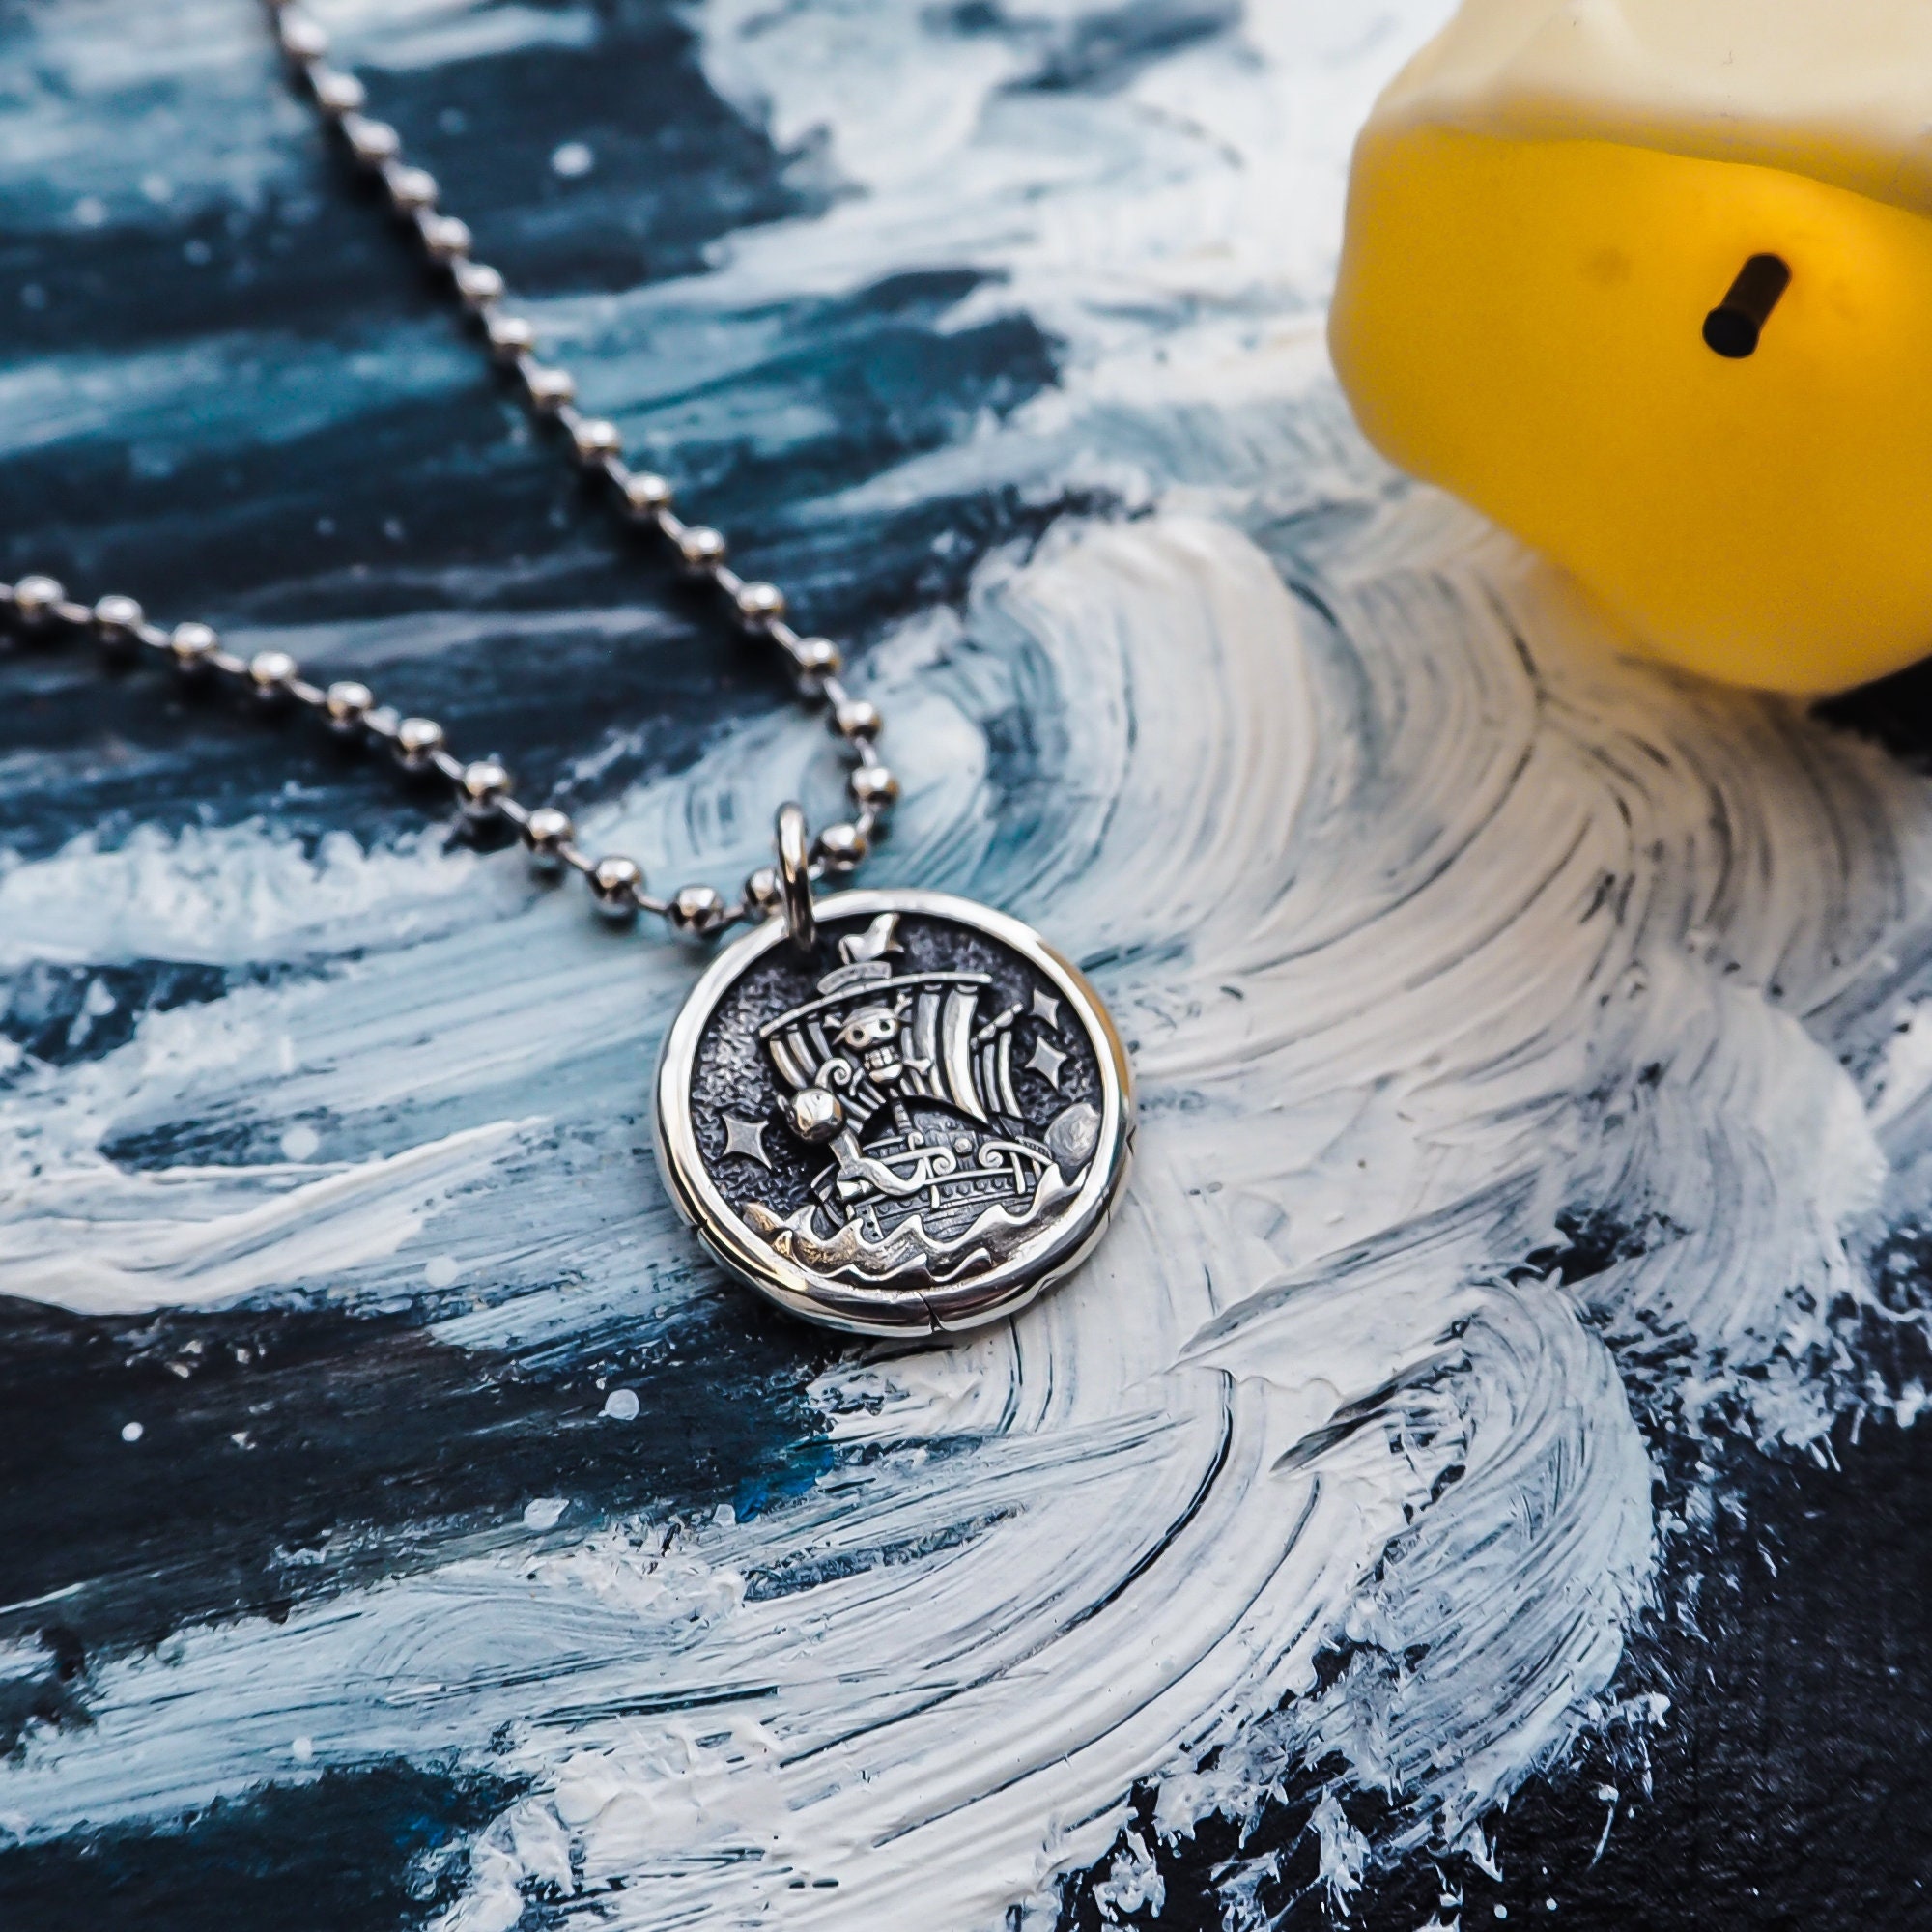 One piece necklace -  France